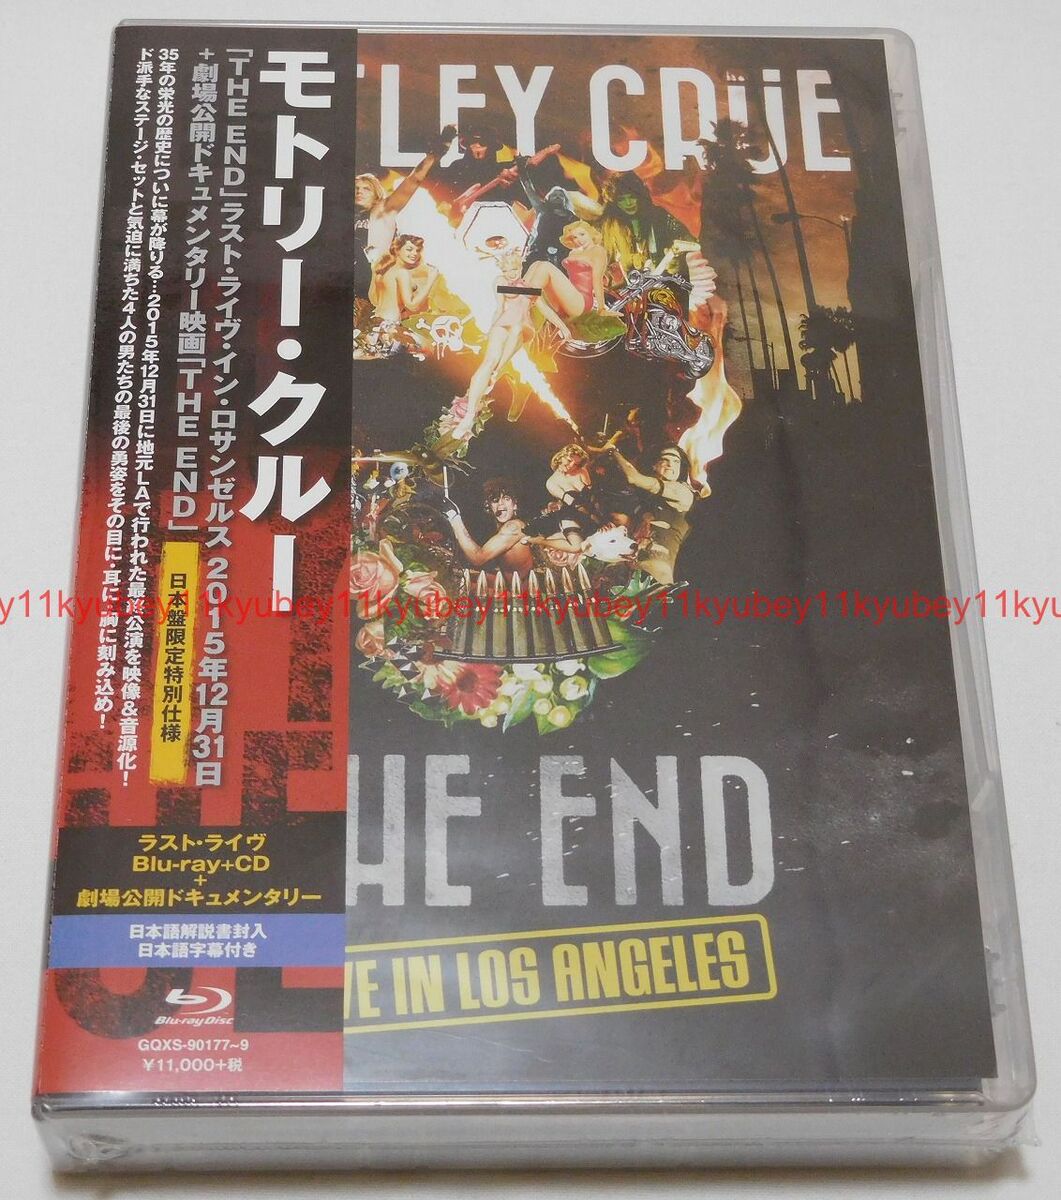 MOTLEY CRUE THE END LAST LIVE IN LOS ANGELES Limited Edition 2 Blu-ray CD  Japan